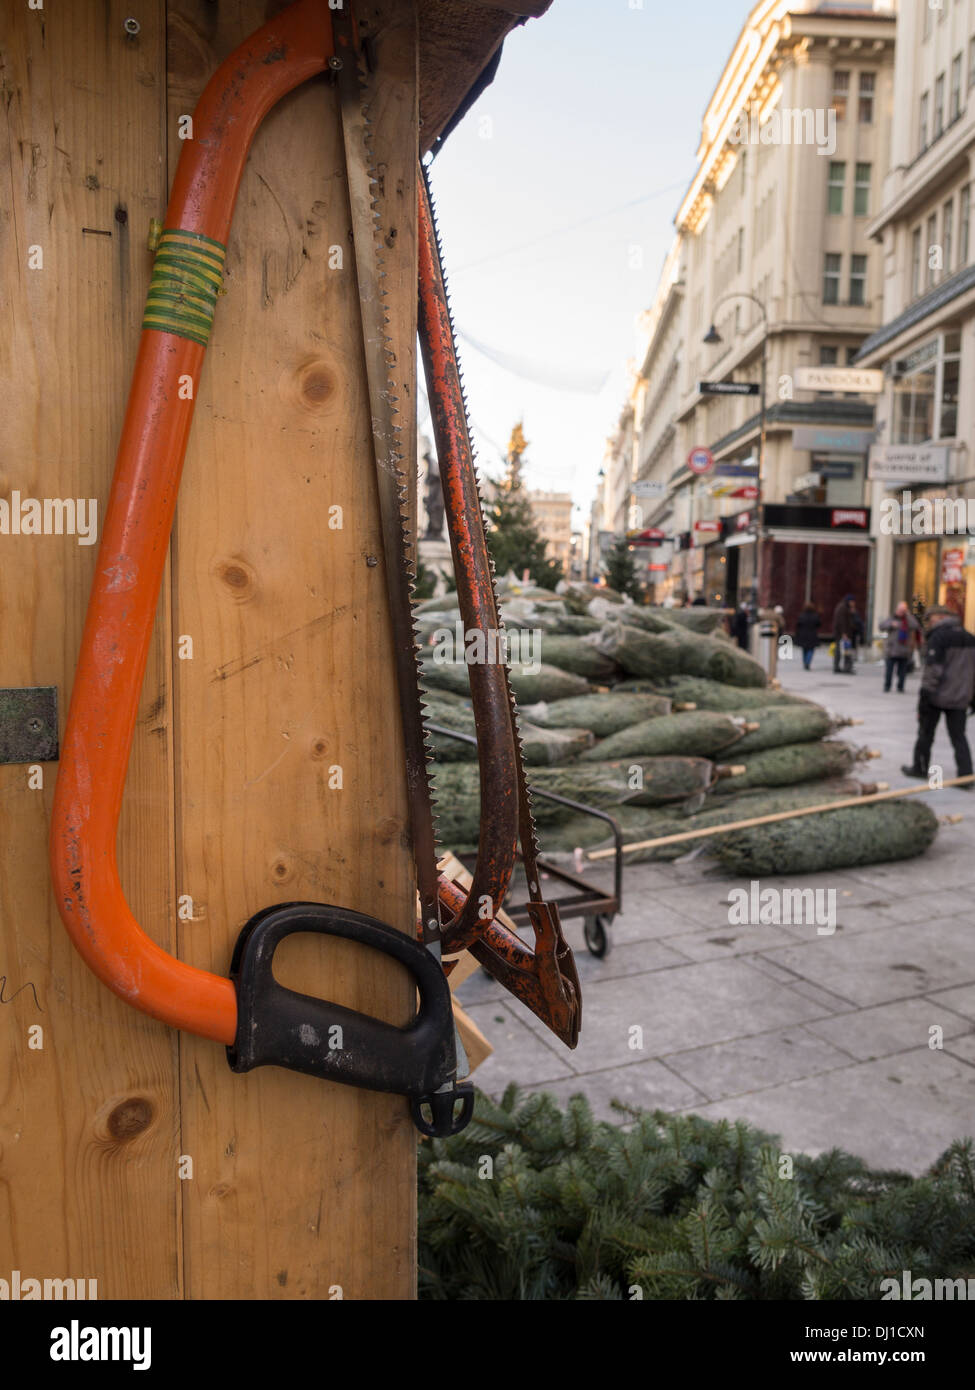 Saws at the Ready on Graben. Swede saws hang on a hut surrounded by just delivered Christmas trees on the main shopping street Stock Photo